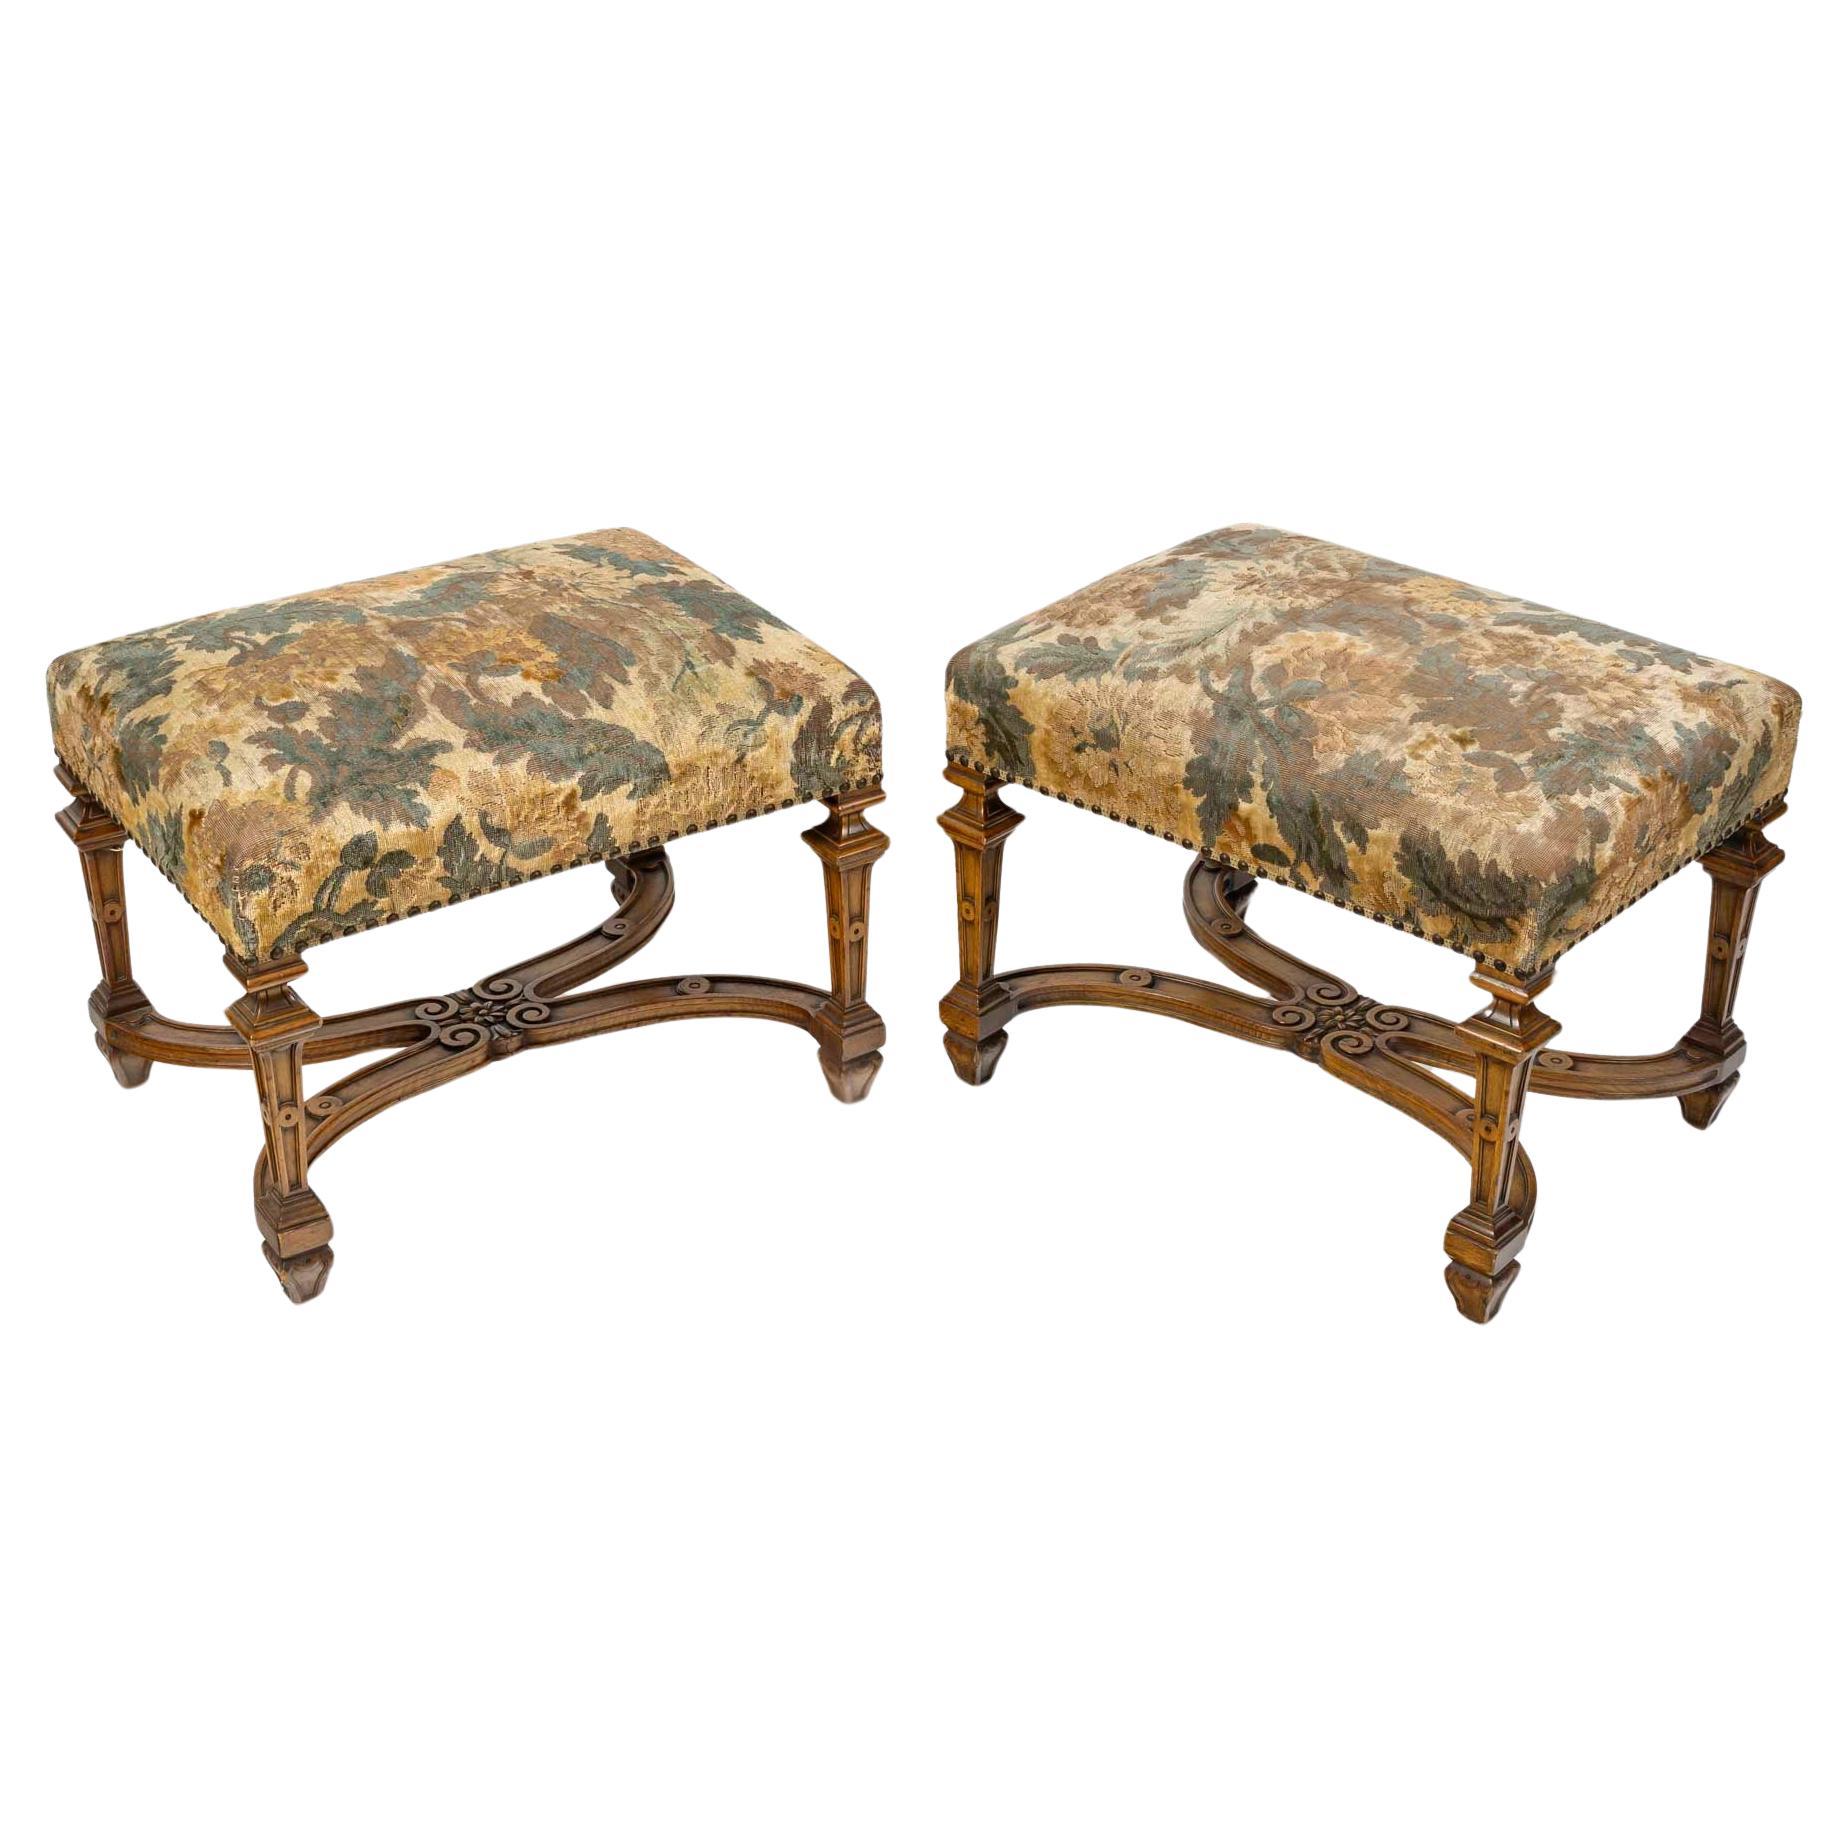 A French 19th Century Pair of Louis XIV Style Stools